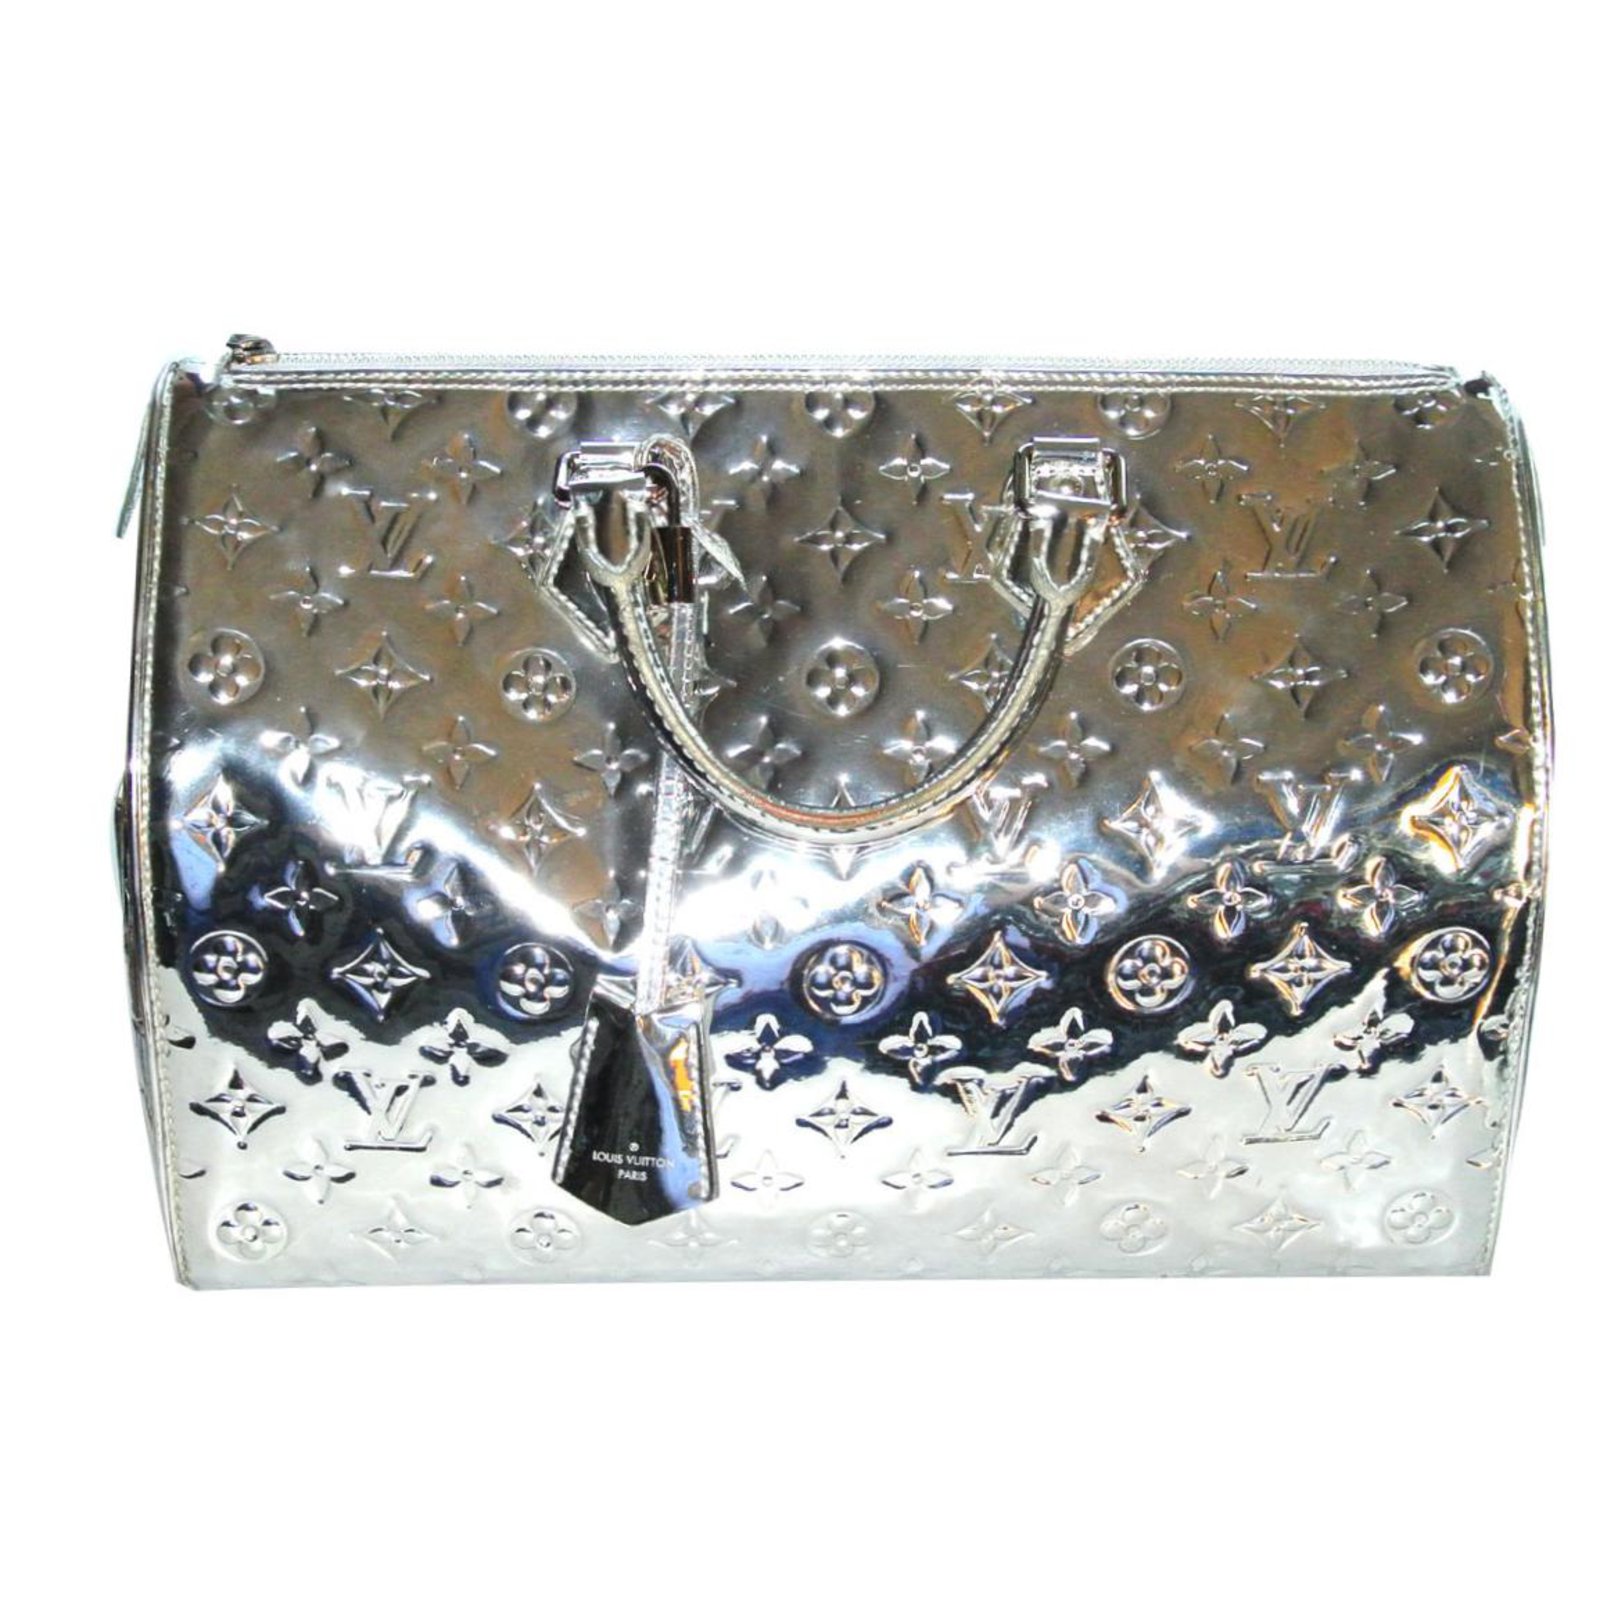 A LIMITED EDITION SILVER MONOGRAM MIROIR SPEEDY 30 WITH SILVER HARDWARE, LOUIS  VUITTON, 2006